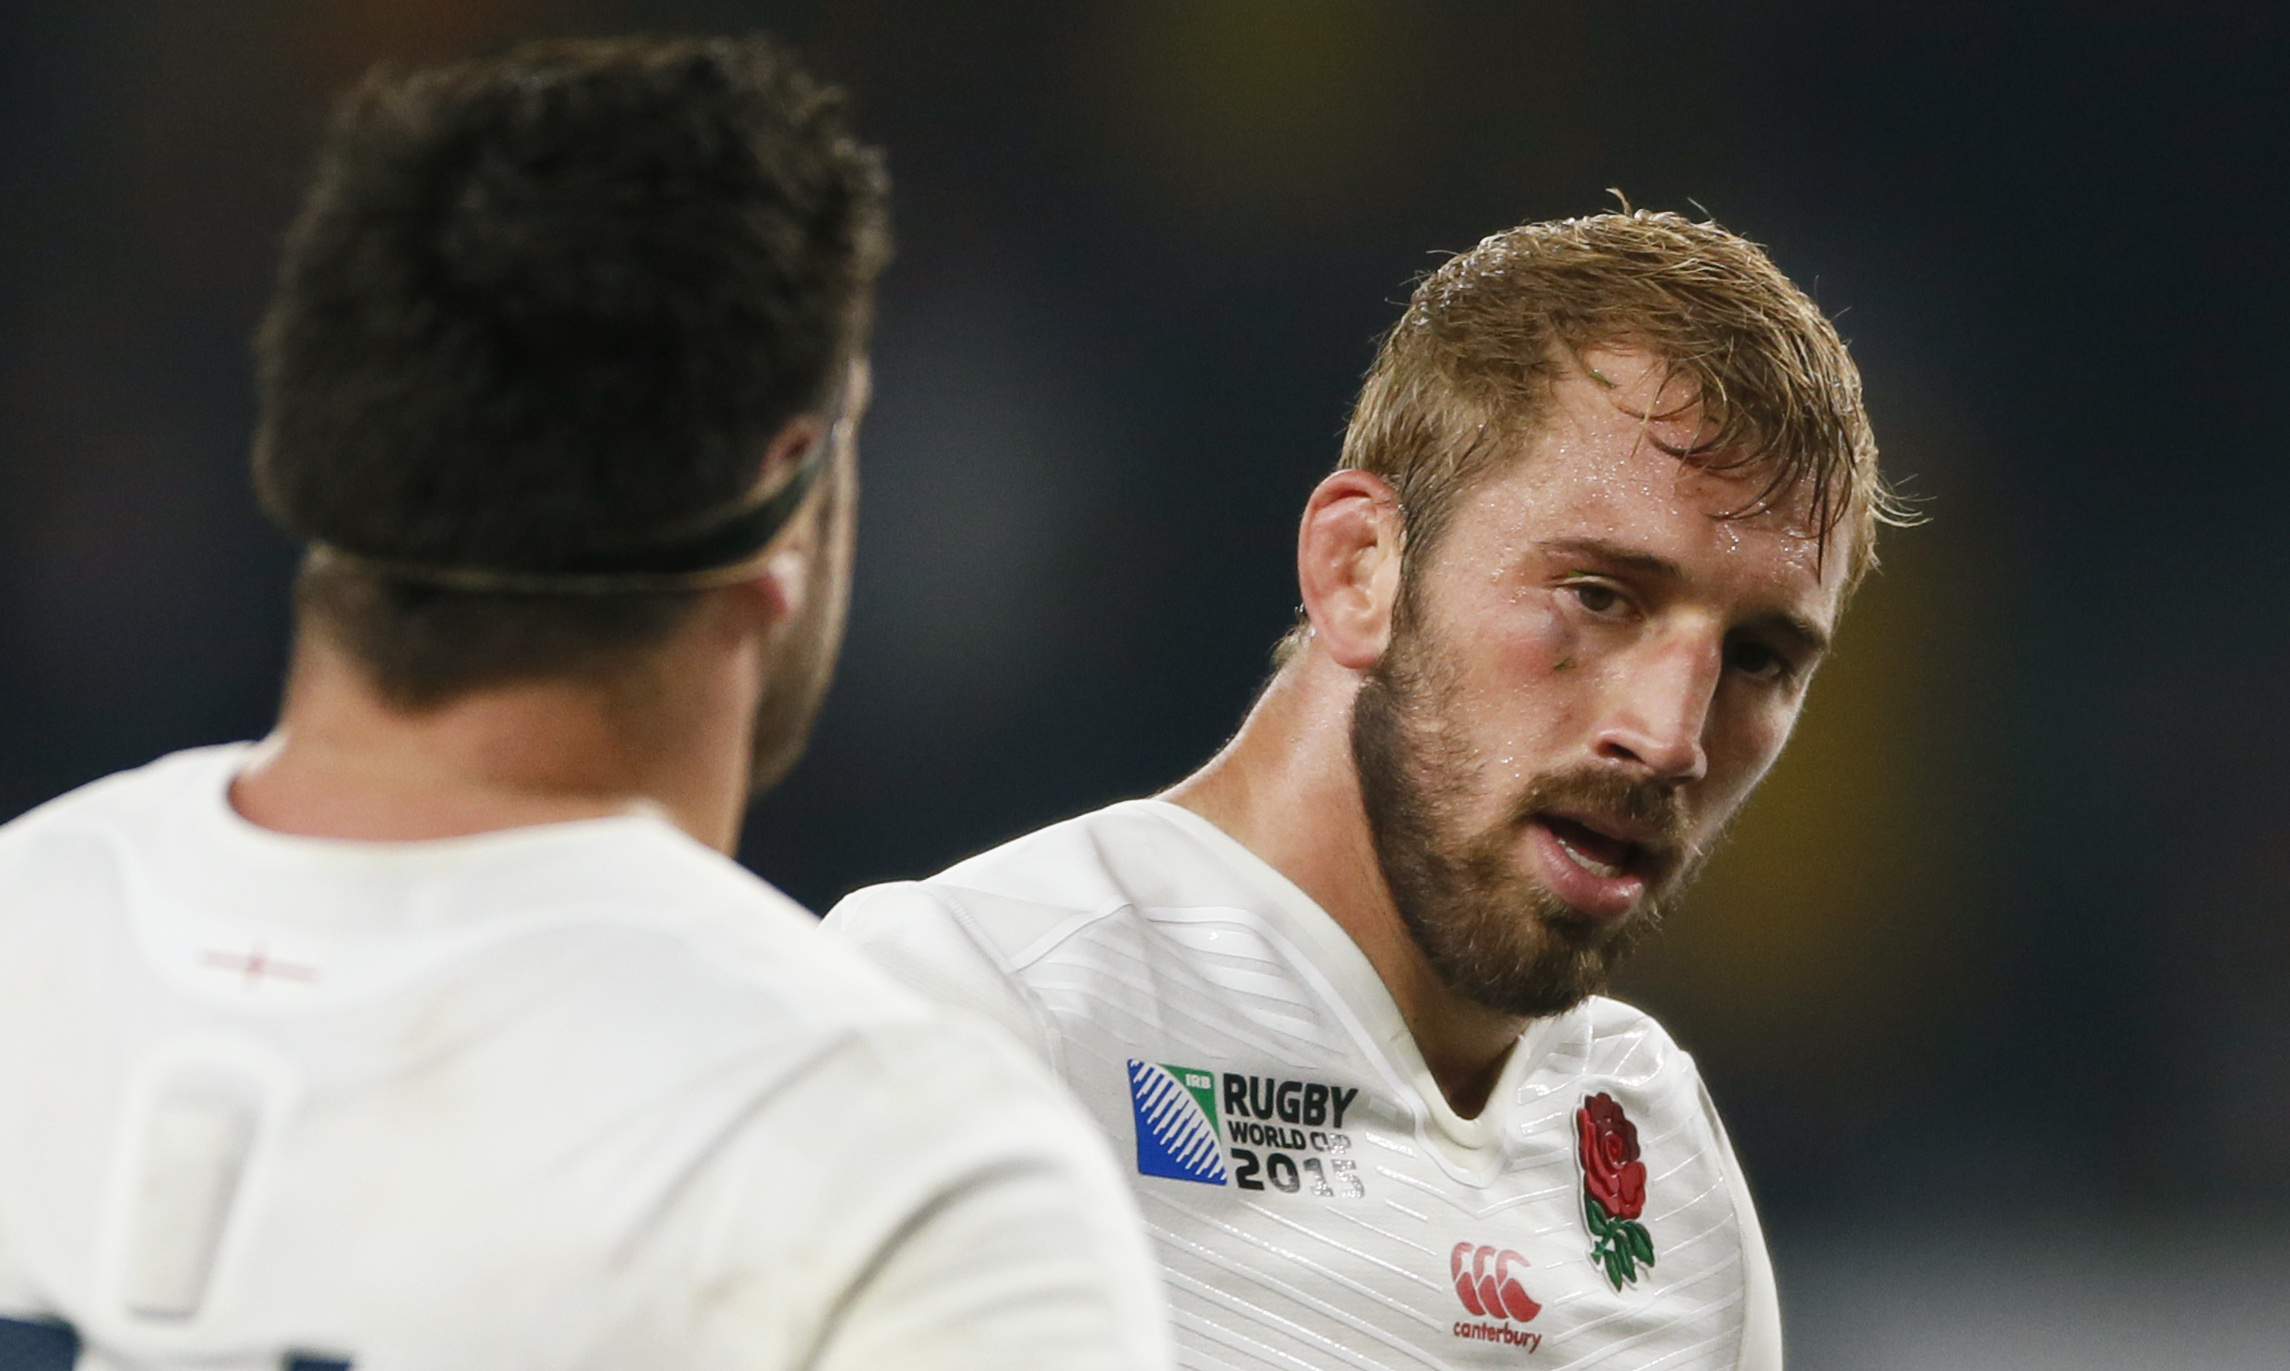 Rugby Union - England v Australia - IRB Rugby World Cup 2015 Pool A - Twickenham Stadium, London, England - 3/10/15 England's Chris Robshaw looks dejected Reuters / Stefan Wermuth Livepic